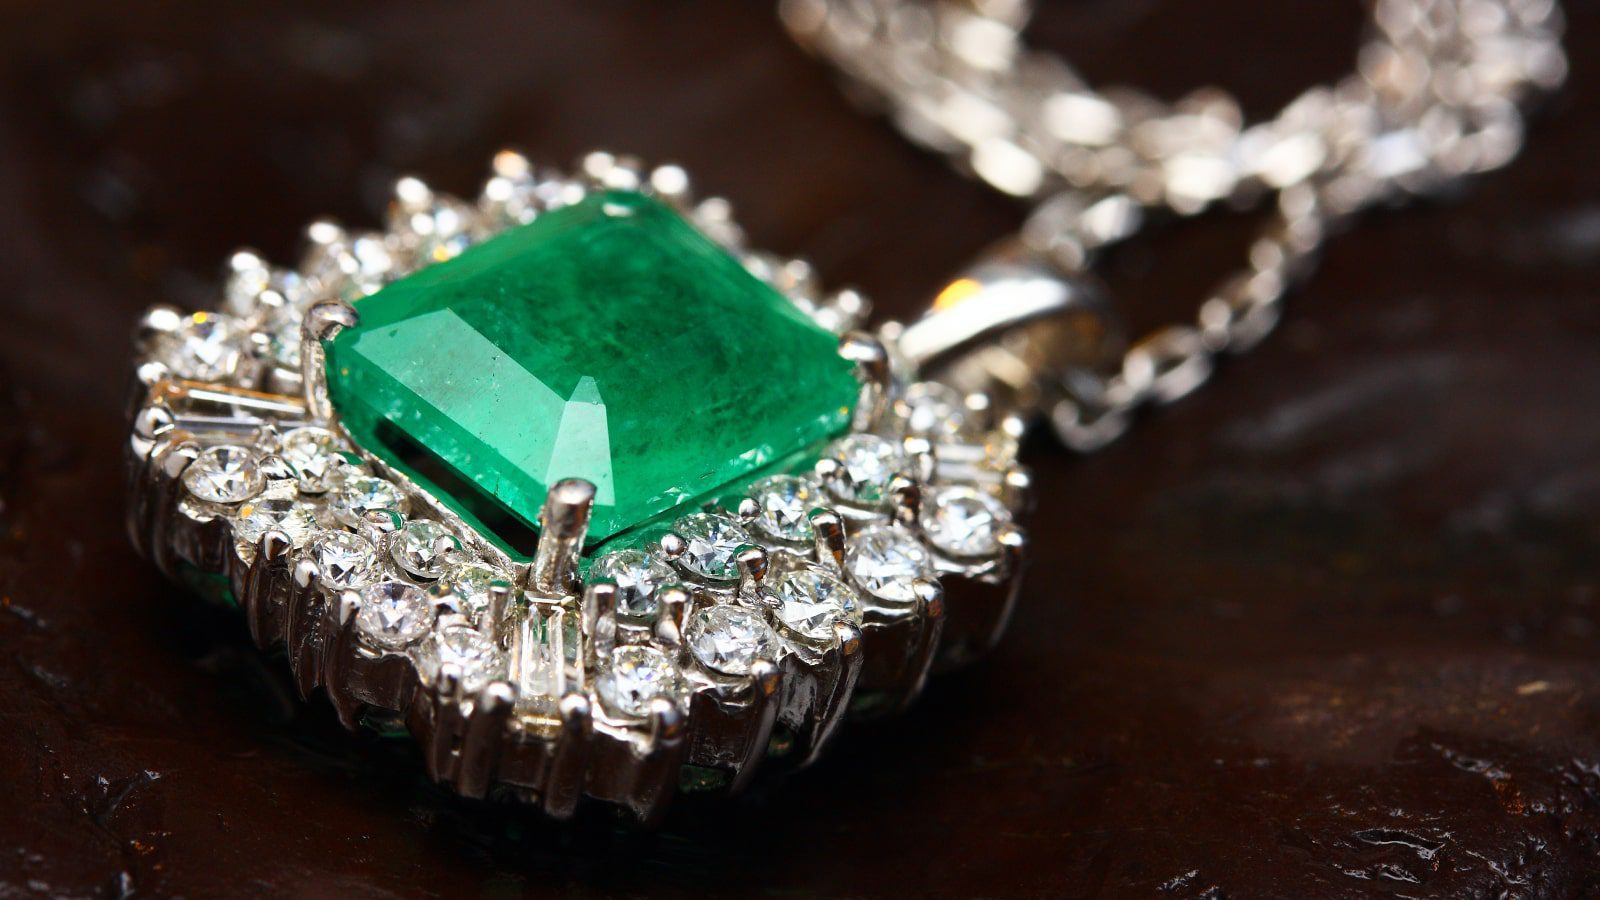 A diamond-encrusted pendant with a large green gemstone.